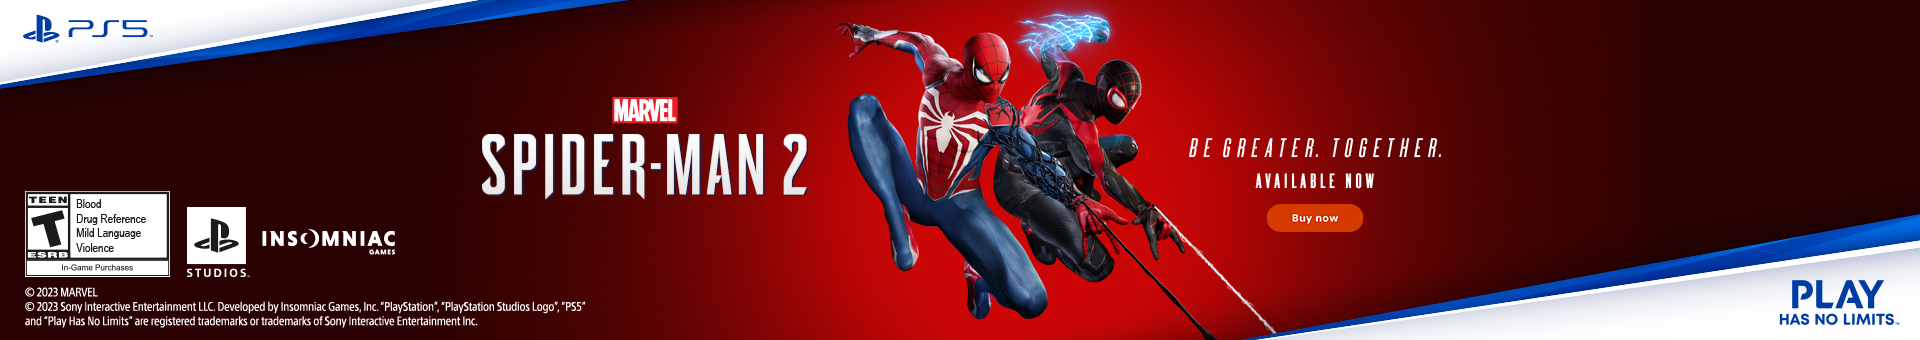 Sony Playstation Games Spiderman2 06.28.23banner